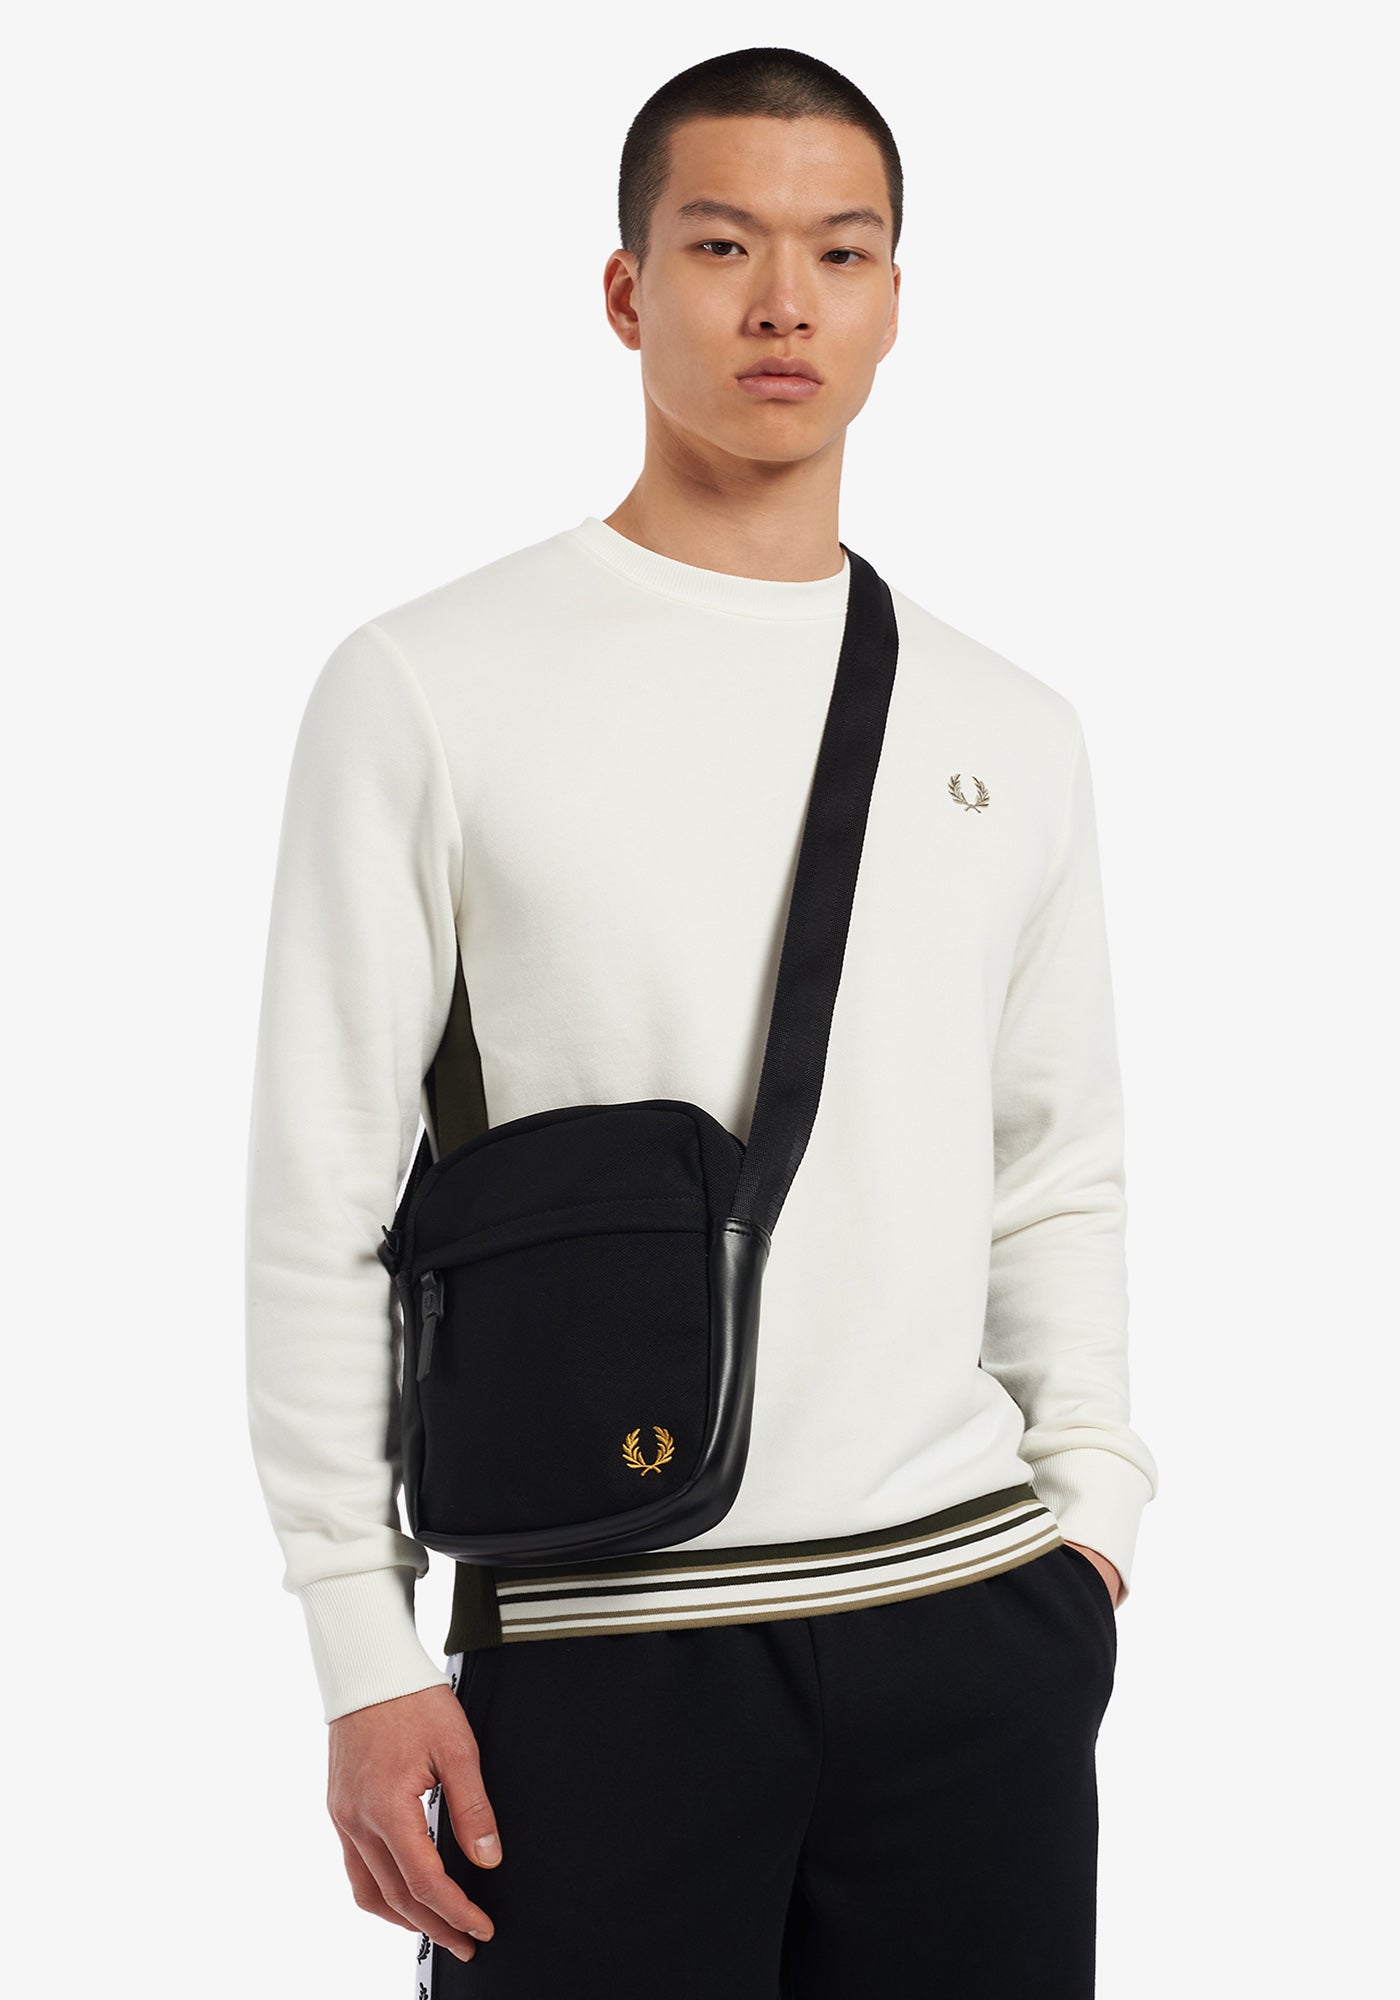 Fred Perry Branded Side Bag